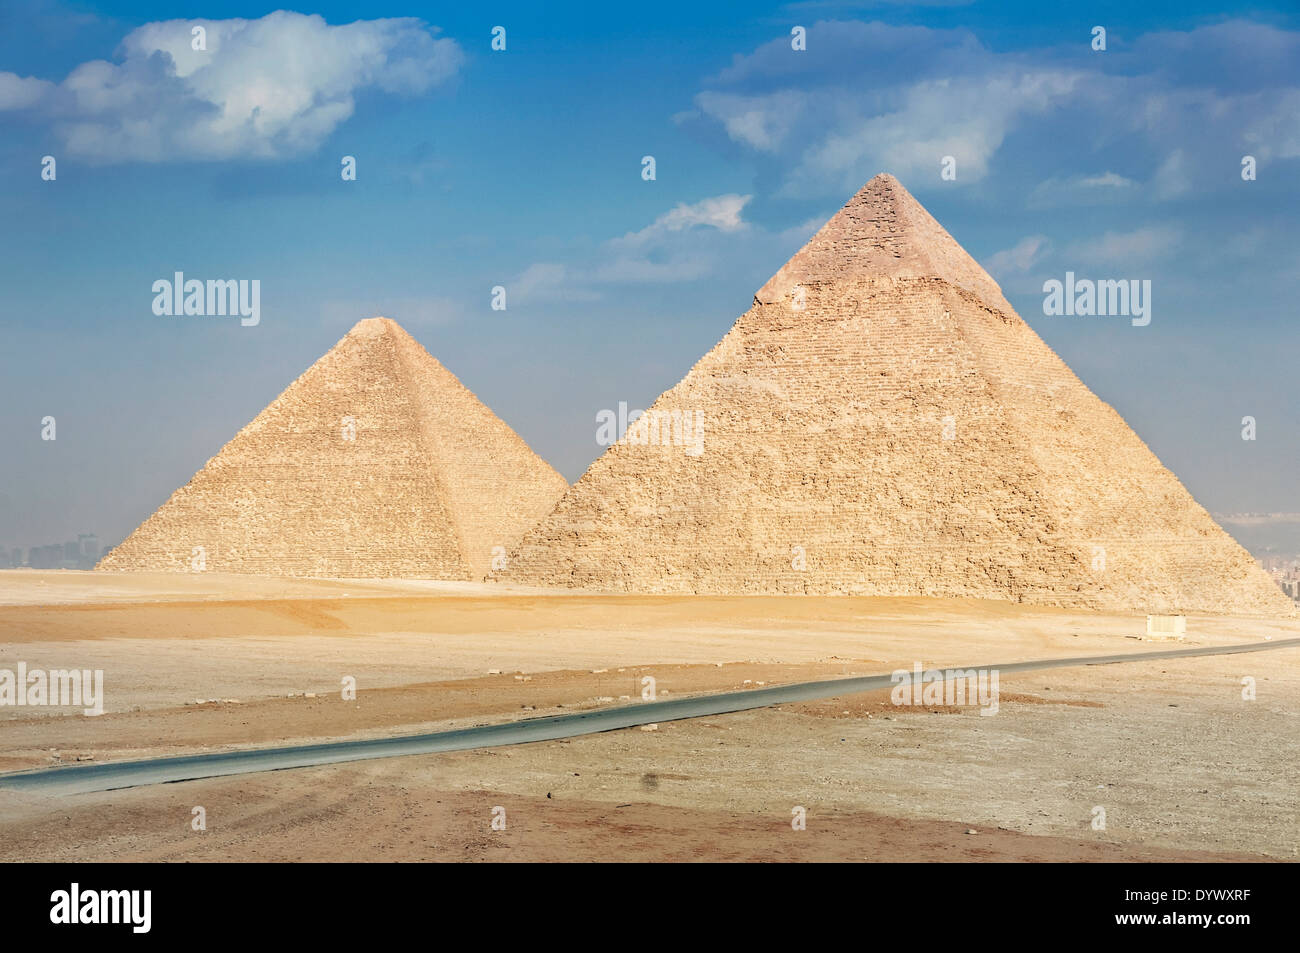 Pyramid of Khufu and Pyramid of Khafre - two of the famous Great Pyramids of Giza in Egypt. Stock Photo